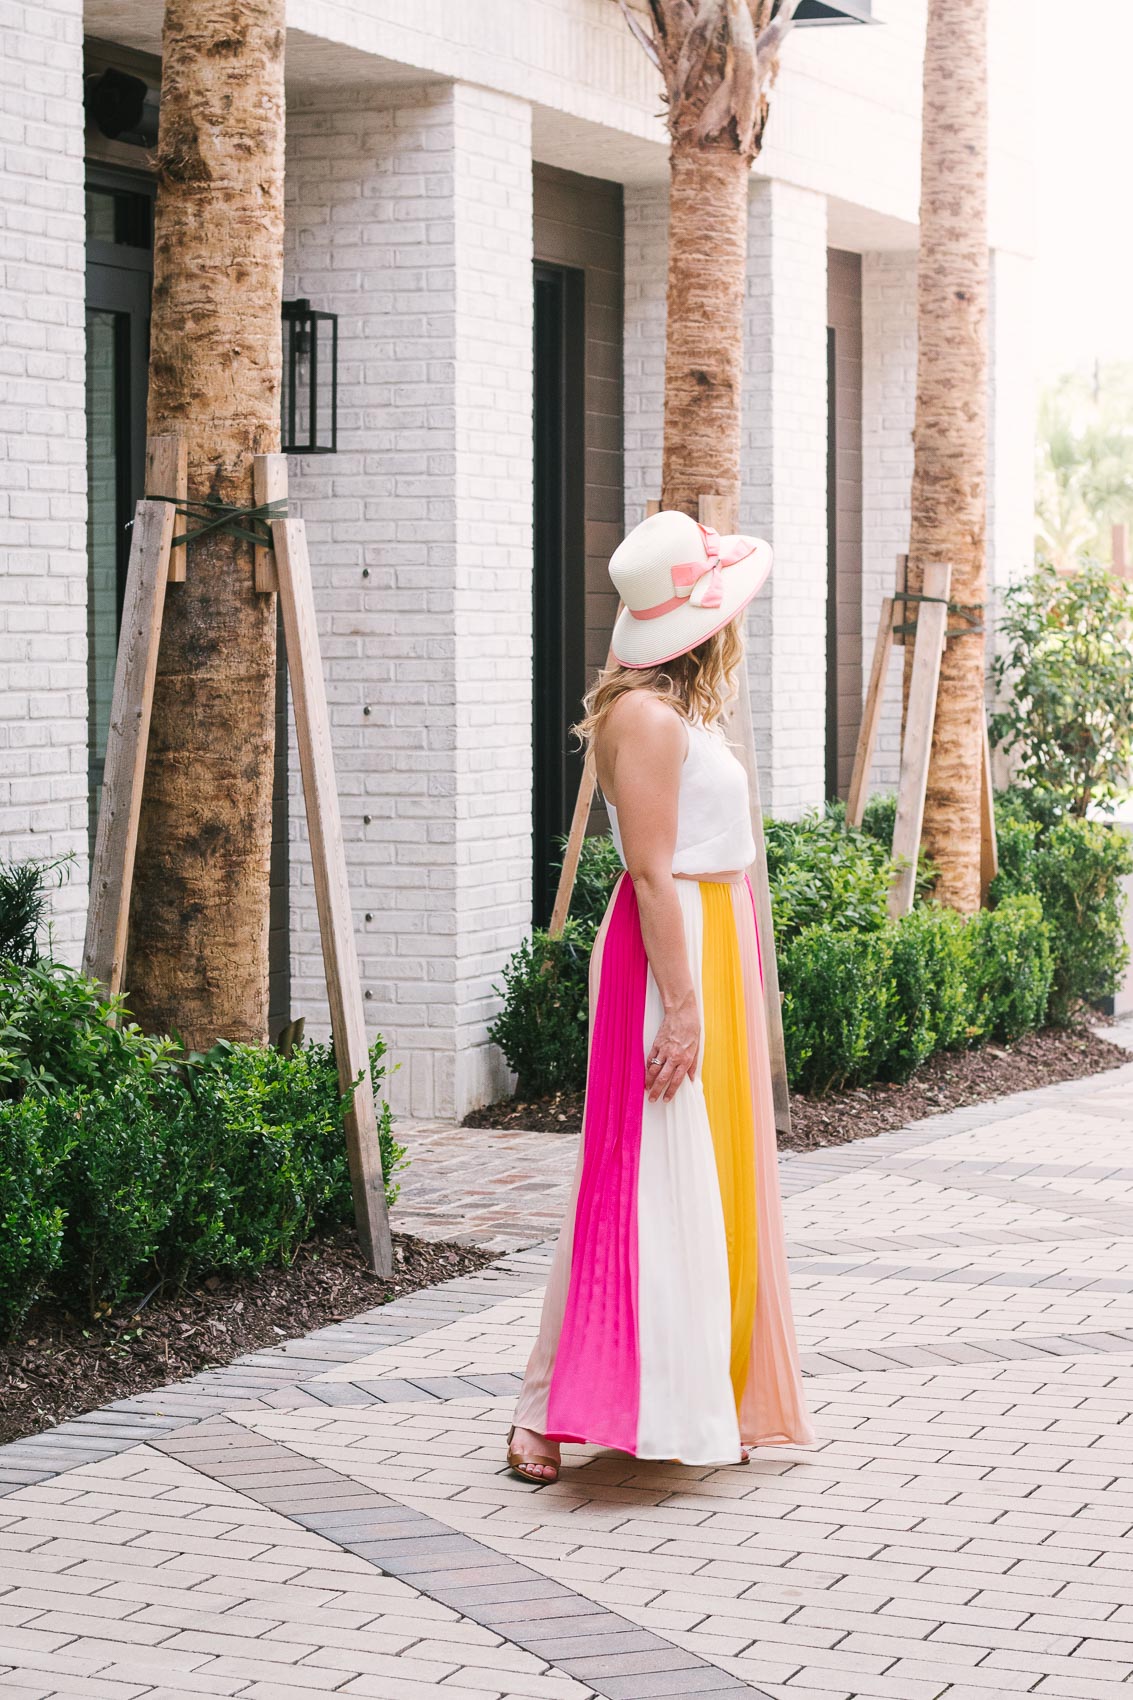 Easy summer outfit: Fashion blogger Allyn Lewis pairs a color blocked pleated skirt with a fresh white cami for an effortless look at Hotel Bella Grace while exploring Charleston, SC.